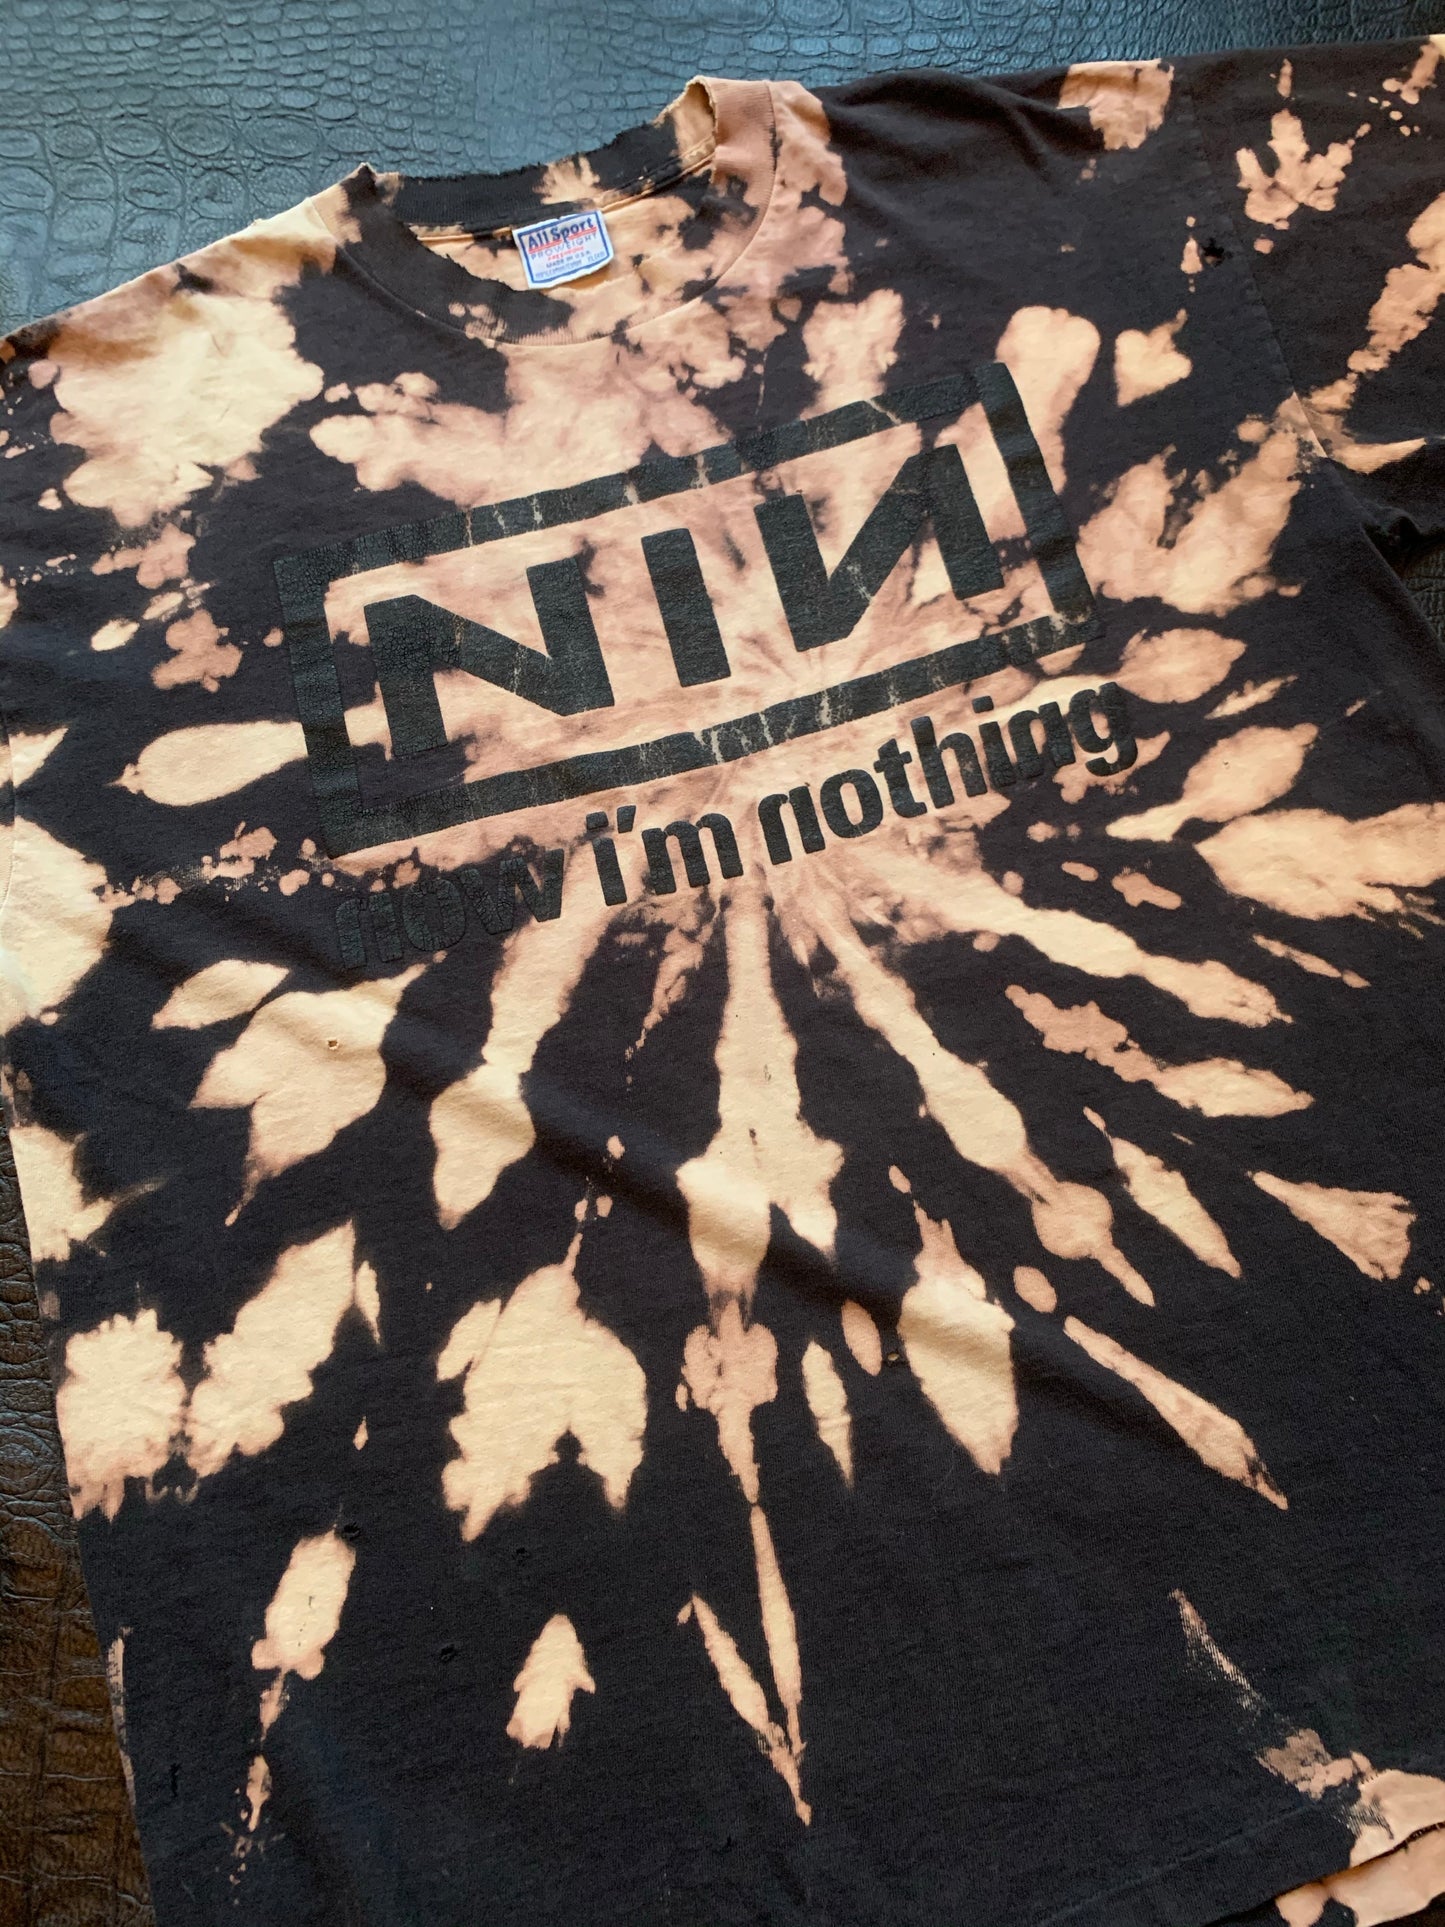 Vintage 90’s Nine Inch Nails Bleach Dyed Now I’m Nothing Tee